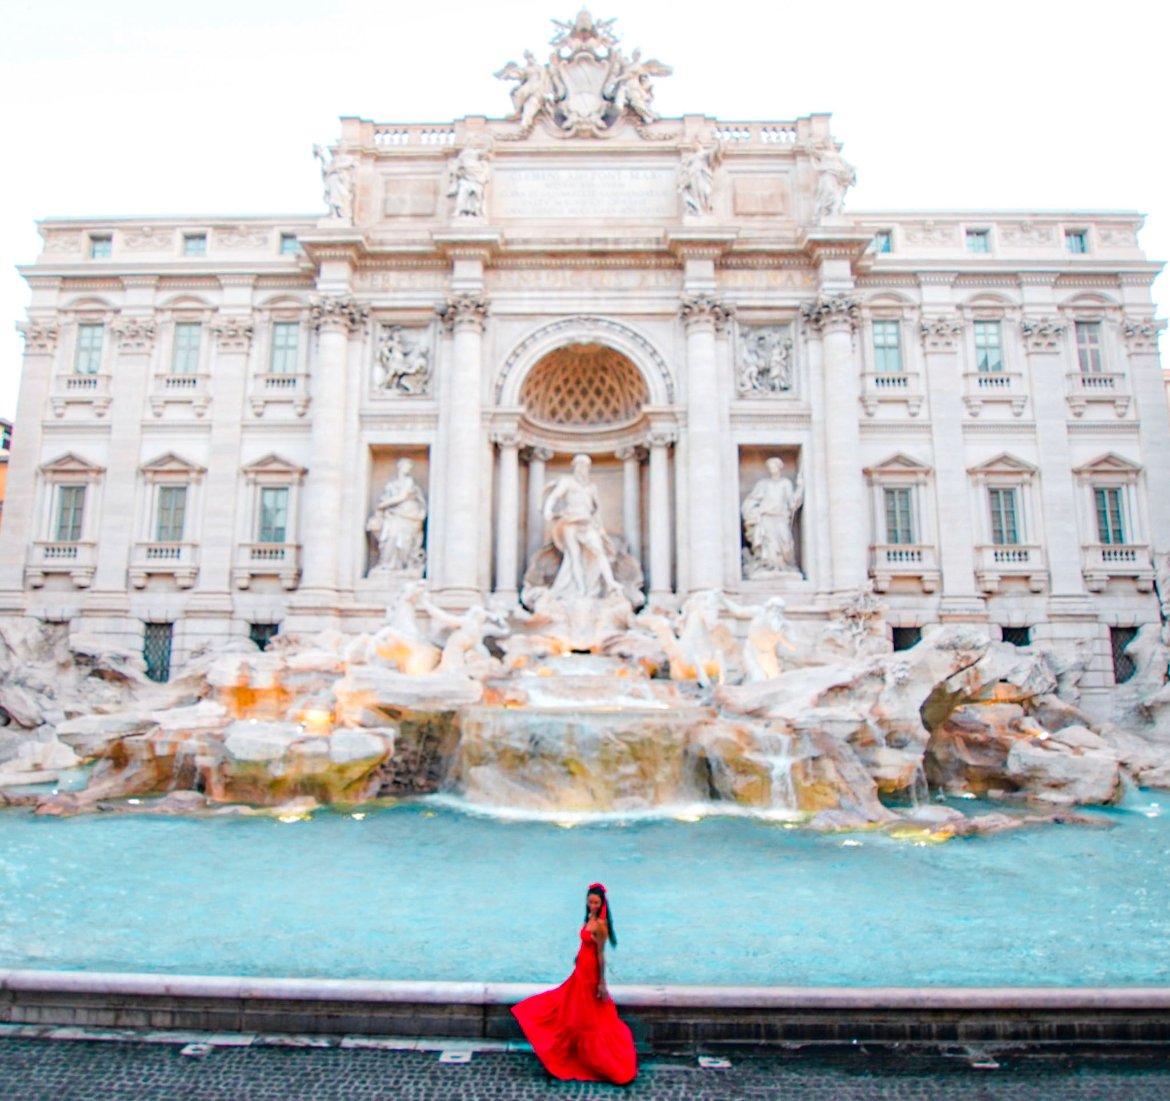 Trevi Fountain, things to see in Rome Italy